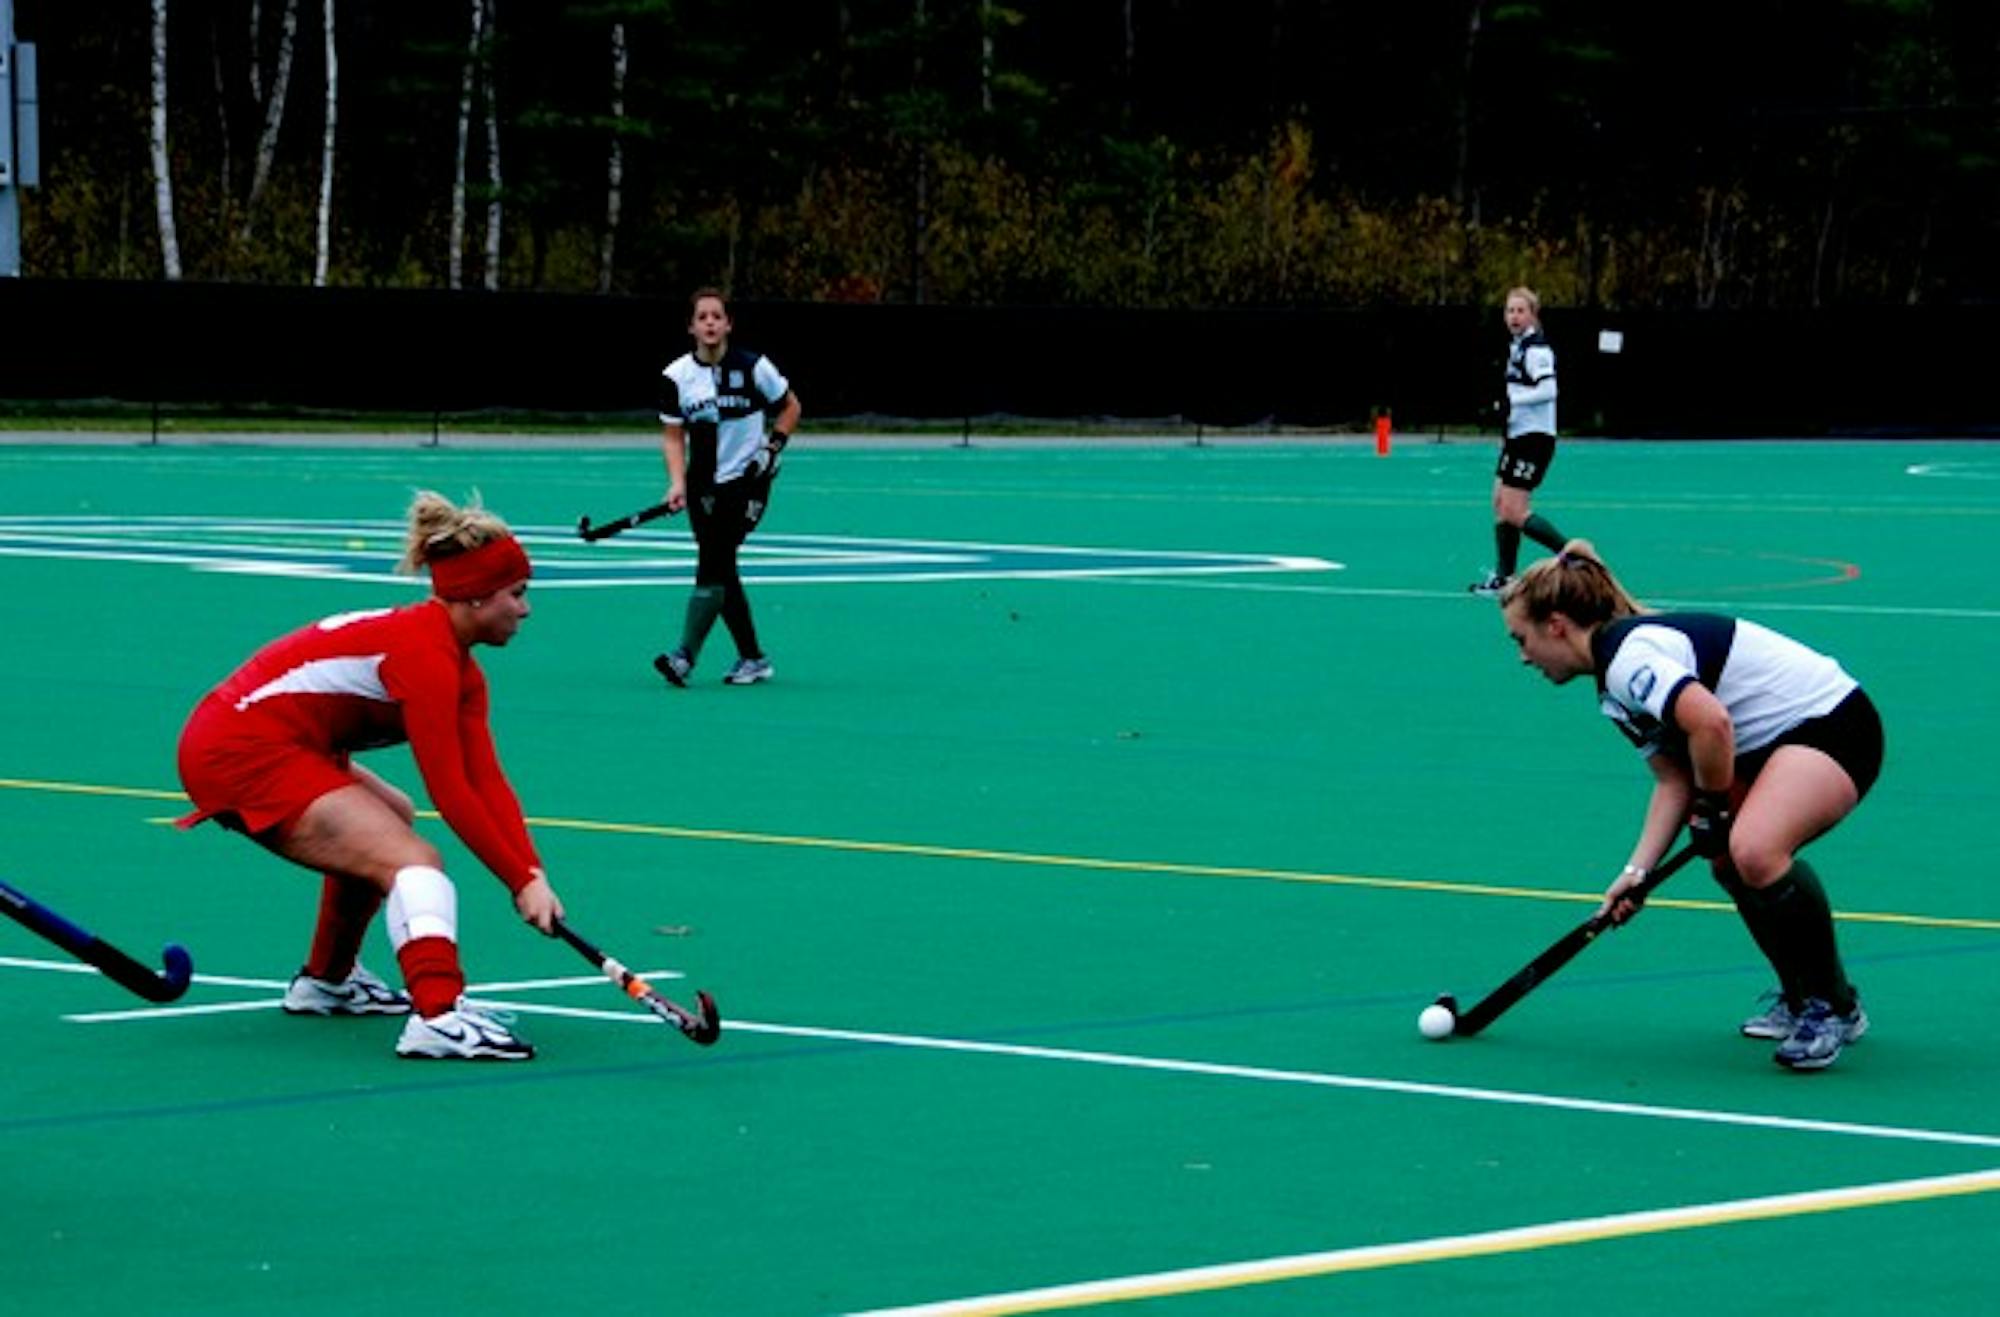 The town of Hanover has approved plans for the College to build a new turf field for Dartmouth's field hockey team.